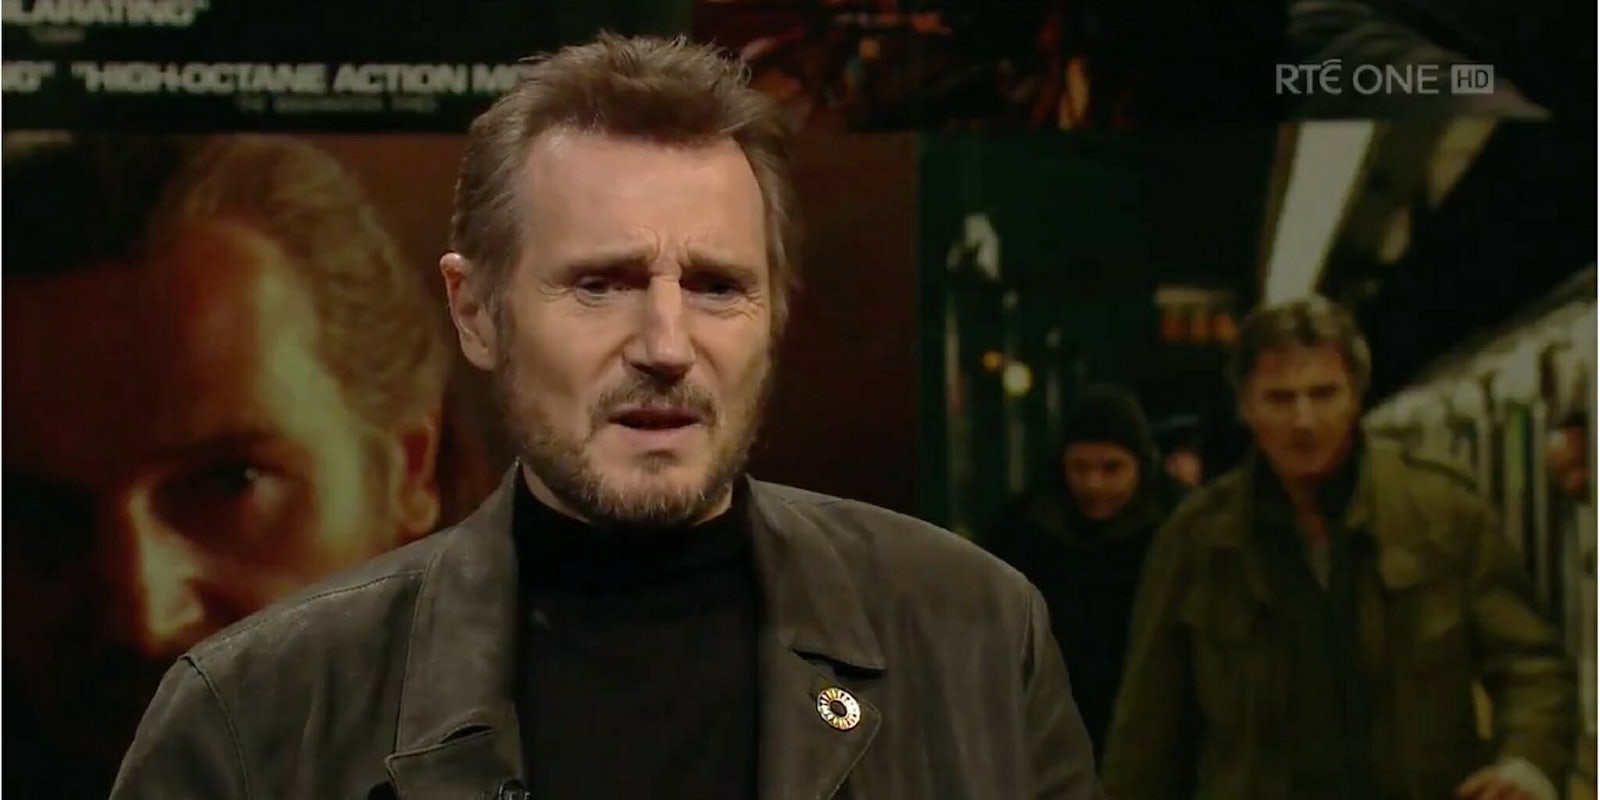 Liam Neeson says there's a 'witch hunt' going on behind the #MeToo movement.